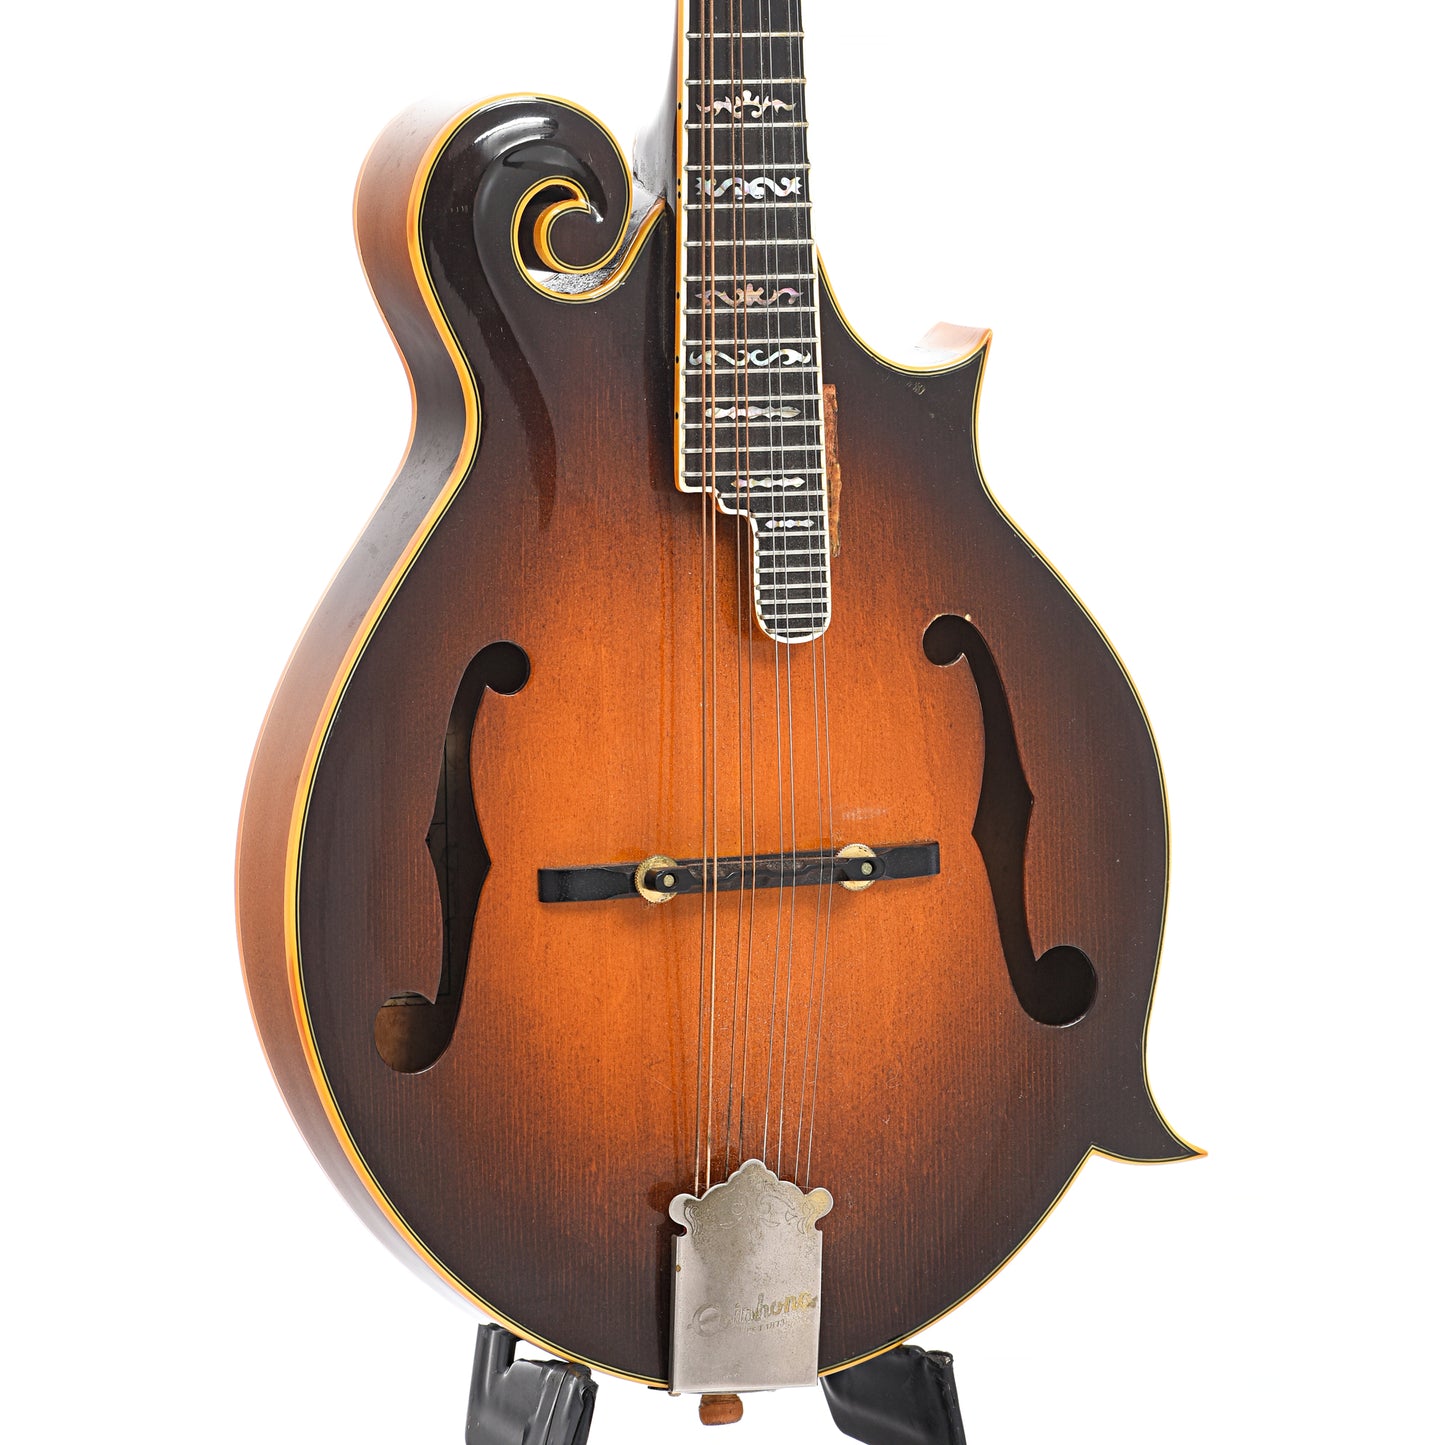 Front and side of Epiphone M-70 Mandolin